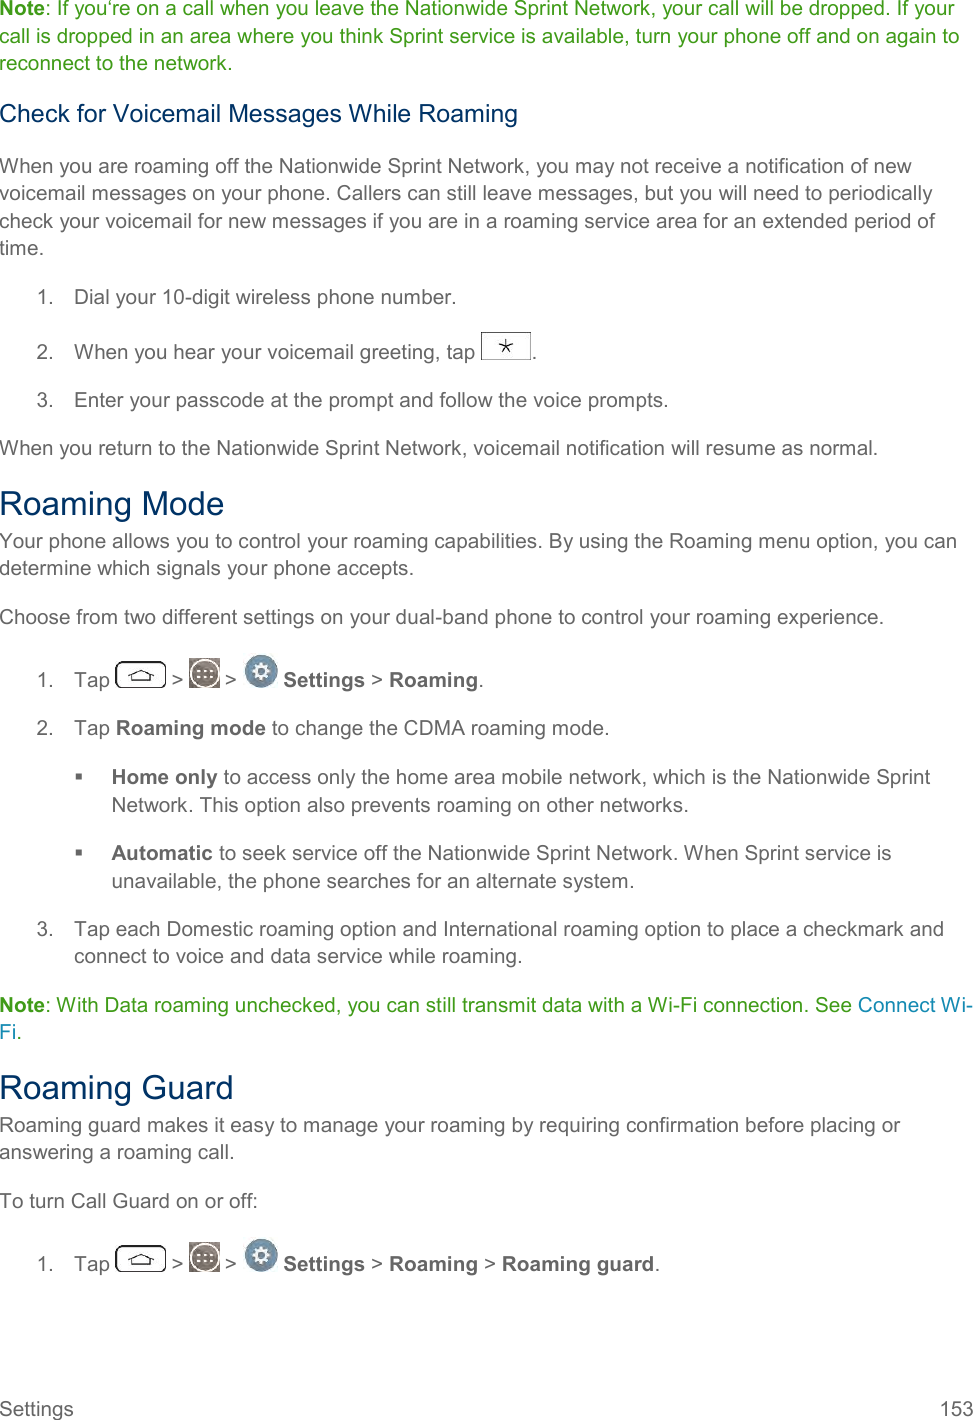 Settings  153 Note: If you‘re on a call when you leave the Nationwide Sprint Network, your call will be dropped. If your call is dropped in an area where you think Sprint service is available, turn your phone off and on again to reconnect to the network. Check for Voicemail Messages While Roaming When you are roaming off the Nationwide Sprint Network, you may not receive a notification of new voicemail messages on your phone. Callers can still leave messages, but you will need to periodically check your voicemail for new messages if you are in a roaming service area for an extended period of time. 1.  Dial your 10-digit wireless phone number. 2.  When you hear your voicemail greeting, tap  . 3.  Enter your passcode at the prompt and follow the voice prompts. When you return to the Nationwide Sprint Network, voicemail notification will resume as normal. Roaming Mode Your phone allows you to control your roaming capabilities. By using the Roaming menu option, you can determine which signals your phone accepts. Choose from two different settings on your dual-band phone to control your roaming experience. 1.  Tap   &gt;   &gt;   Settings &gt; Roaming. 2.  Tap Roaming mode to change the CDMA roaming mode.  Home only to access only the home area mobile network, which is the Nationwide Sprint Network. This option also prevents roaming on other networks.  Automatic to seek service off the Nationwide Sprint Network. When Sprint service is unavailable, the phone searches for an alternate system. 3.  Tap each Domestic roaming option and International roaming option to place a checkmark and connect to voice and data service while roaming.  Note: With Data roaming unchecked, you can still transmit data with a Wi-Fi connection. See Connect Wi-Fi. Roaming Guard Roaming guard makes it easy to manage your roaming by requiring confirmation before placing or answering a roaming call. To turn Call Guard on or off: 1.  Tap   &gt;   &gt;   Settings &gt; Roaming &gt; Roaming guard. 